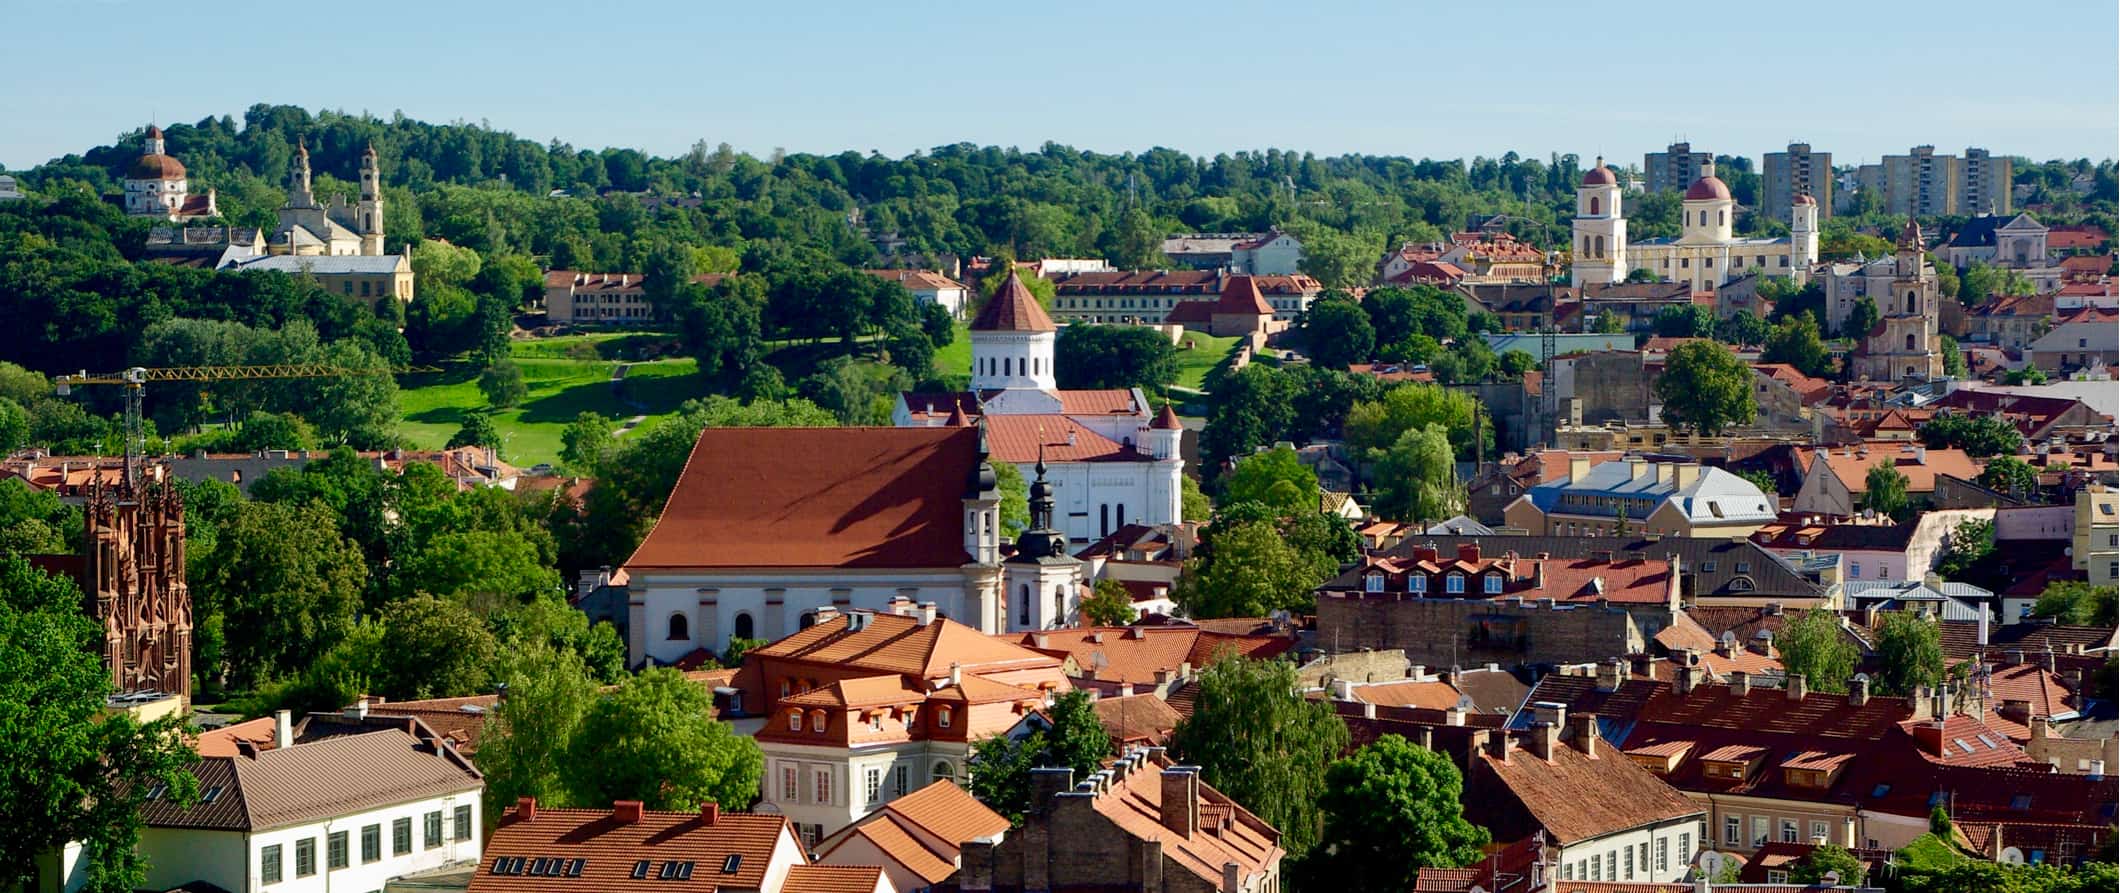 Historic buildings surrounded by lush, greens forests in Lithuania on a sunny day